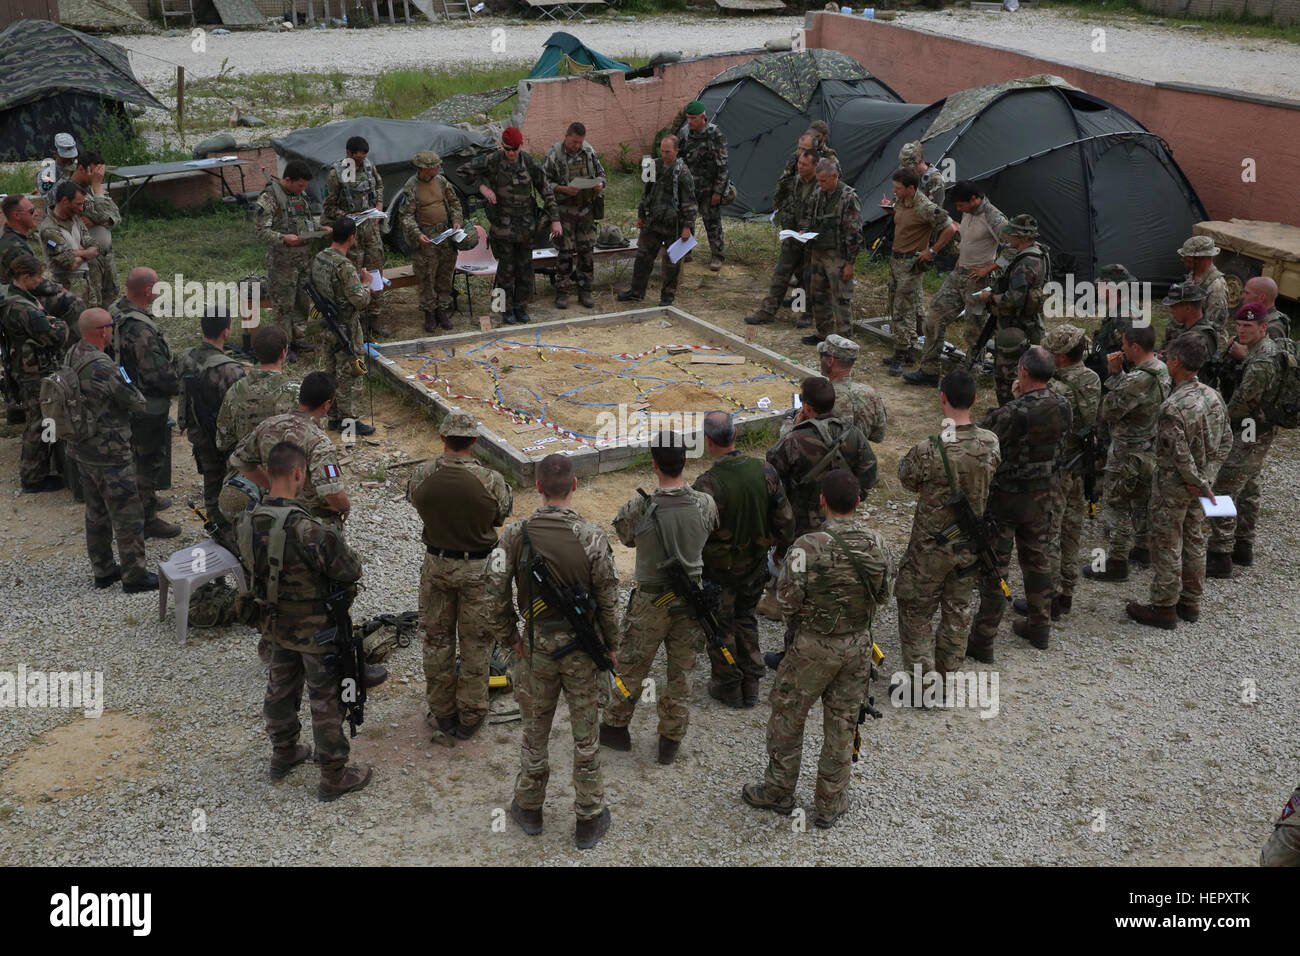 British soldiers of the 3rd Parachute Regiment and French soldiers of 3rd Marine Infantry Parachute Regiment conduct a coalition operations briefing during Swift Response 16 training exercise at the Hohenfels Training Area, a part of the Joint Multinational Readiness Center, in Hohenfels, Germany, Jun. 22, 2016. Exercise Swift Response is one of the premier military crisis response training events for multi-national airborne forces in the world. The exercise is designed to enhance the readiness of the combat core of the U.S. Global Response Force – currently the 82nd Airborne Division’s 1st Br Stock Photo